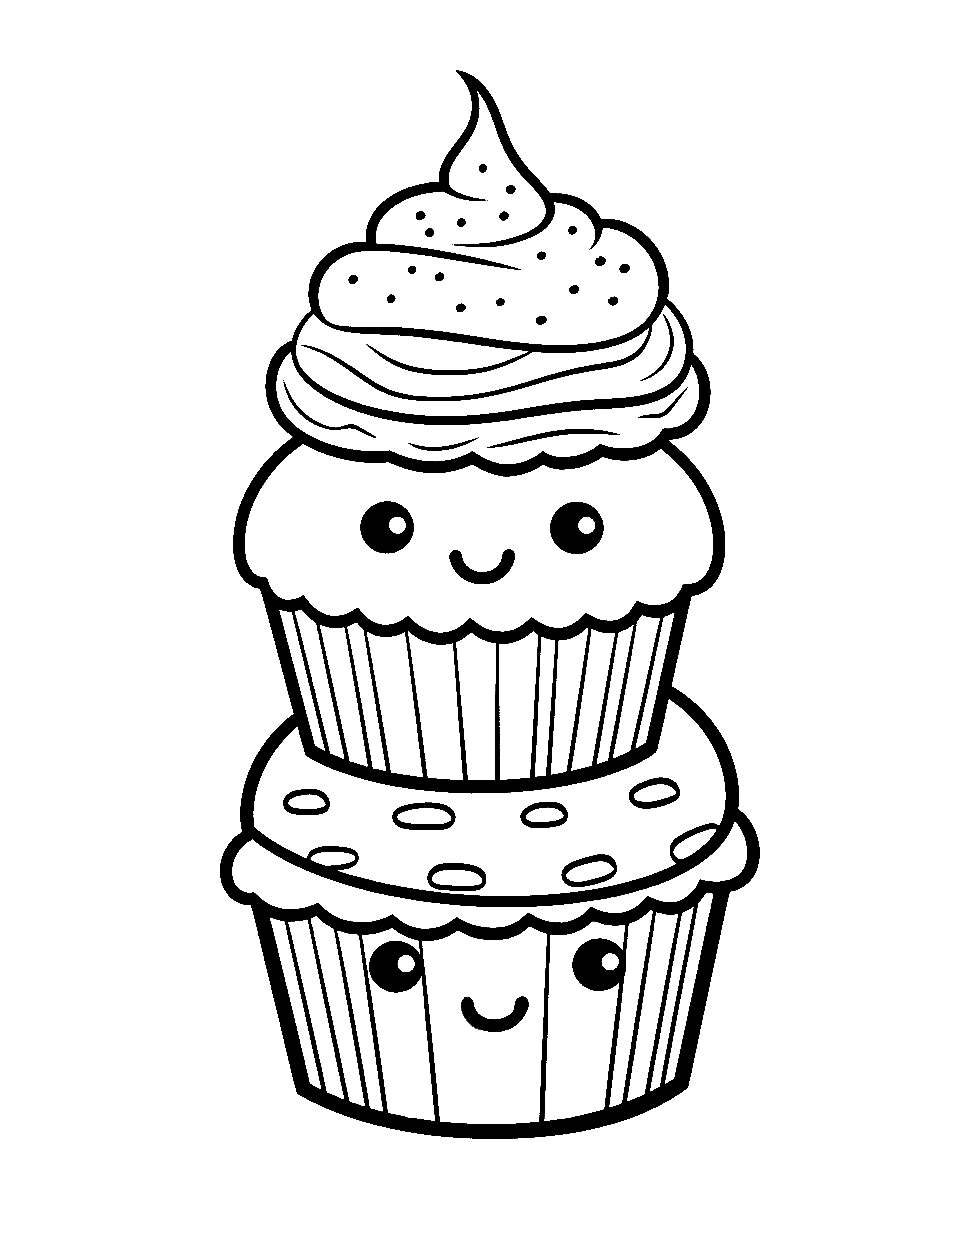 Kawaii Cupcake Tower Food Coloring Page - Mini cupcakes stacked in a tower with cute faces.